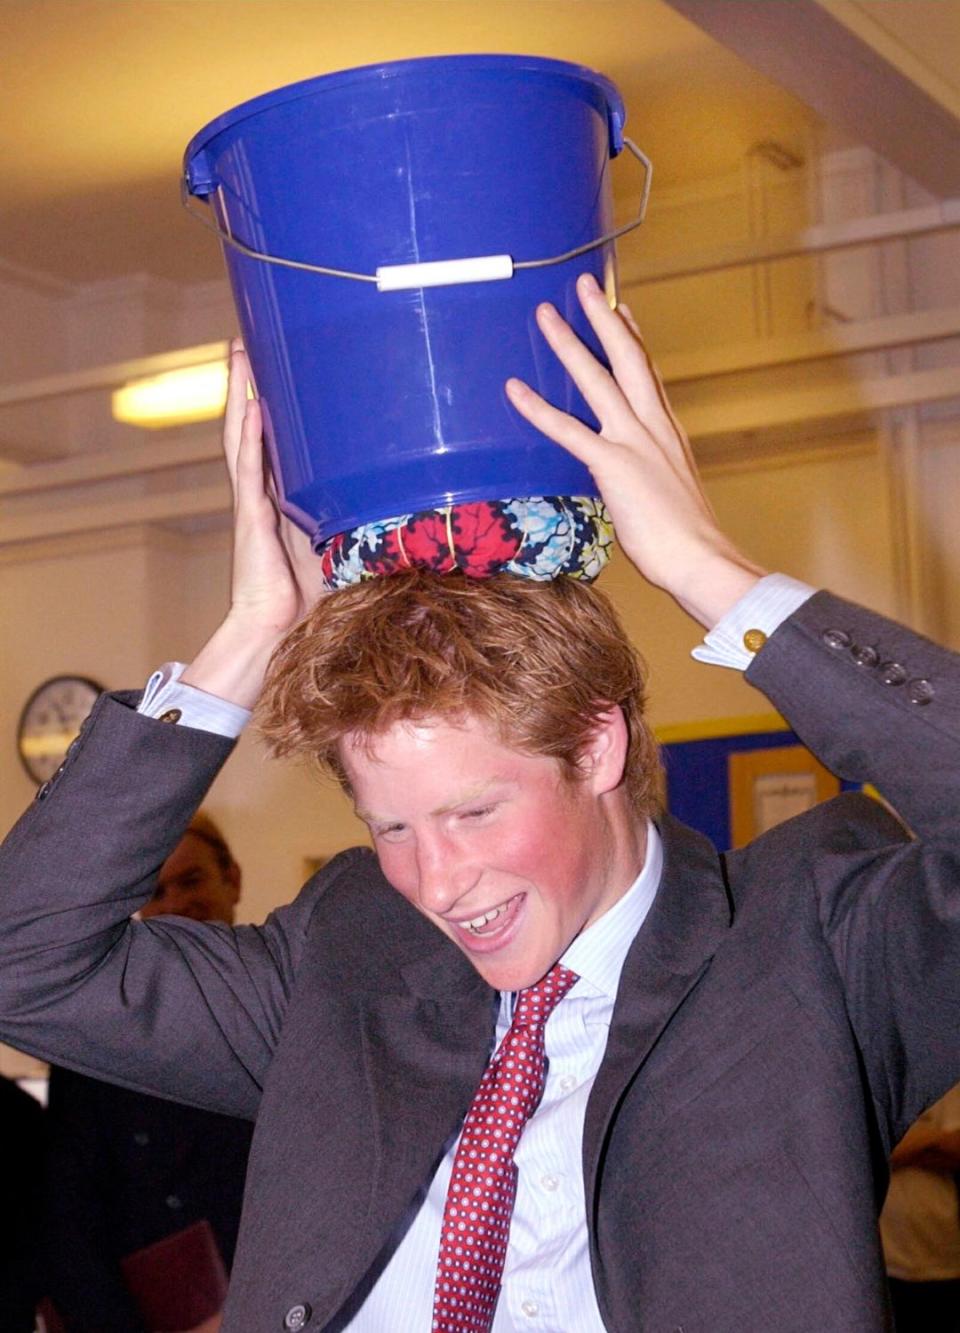 Prince Harry with a bucket on his head